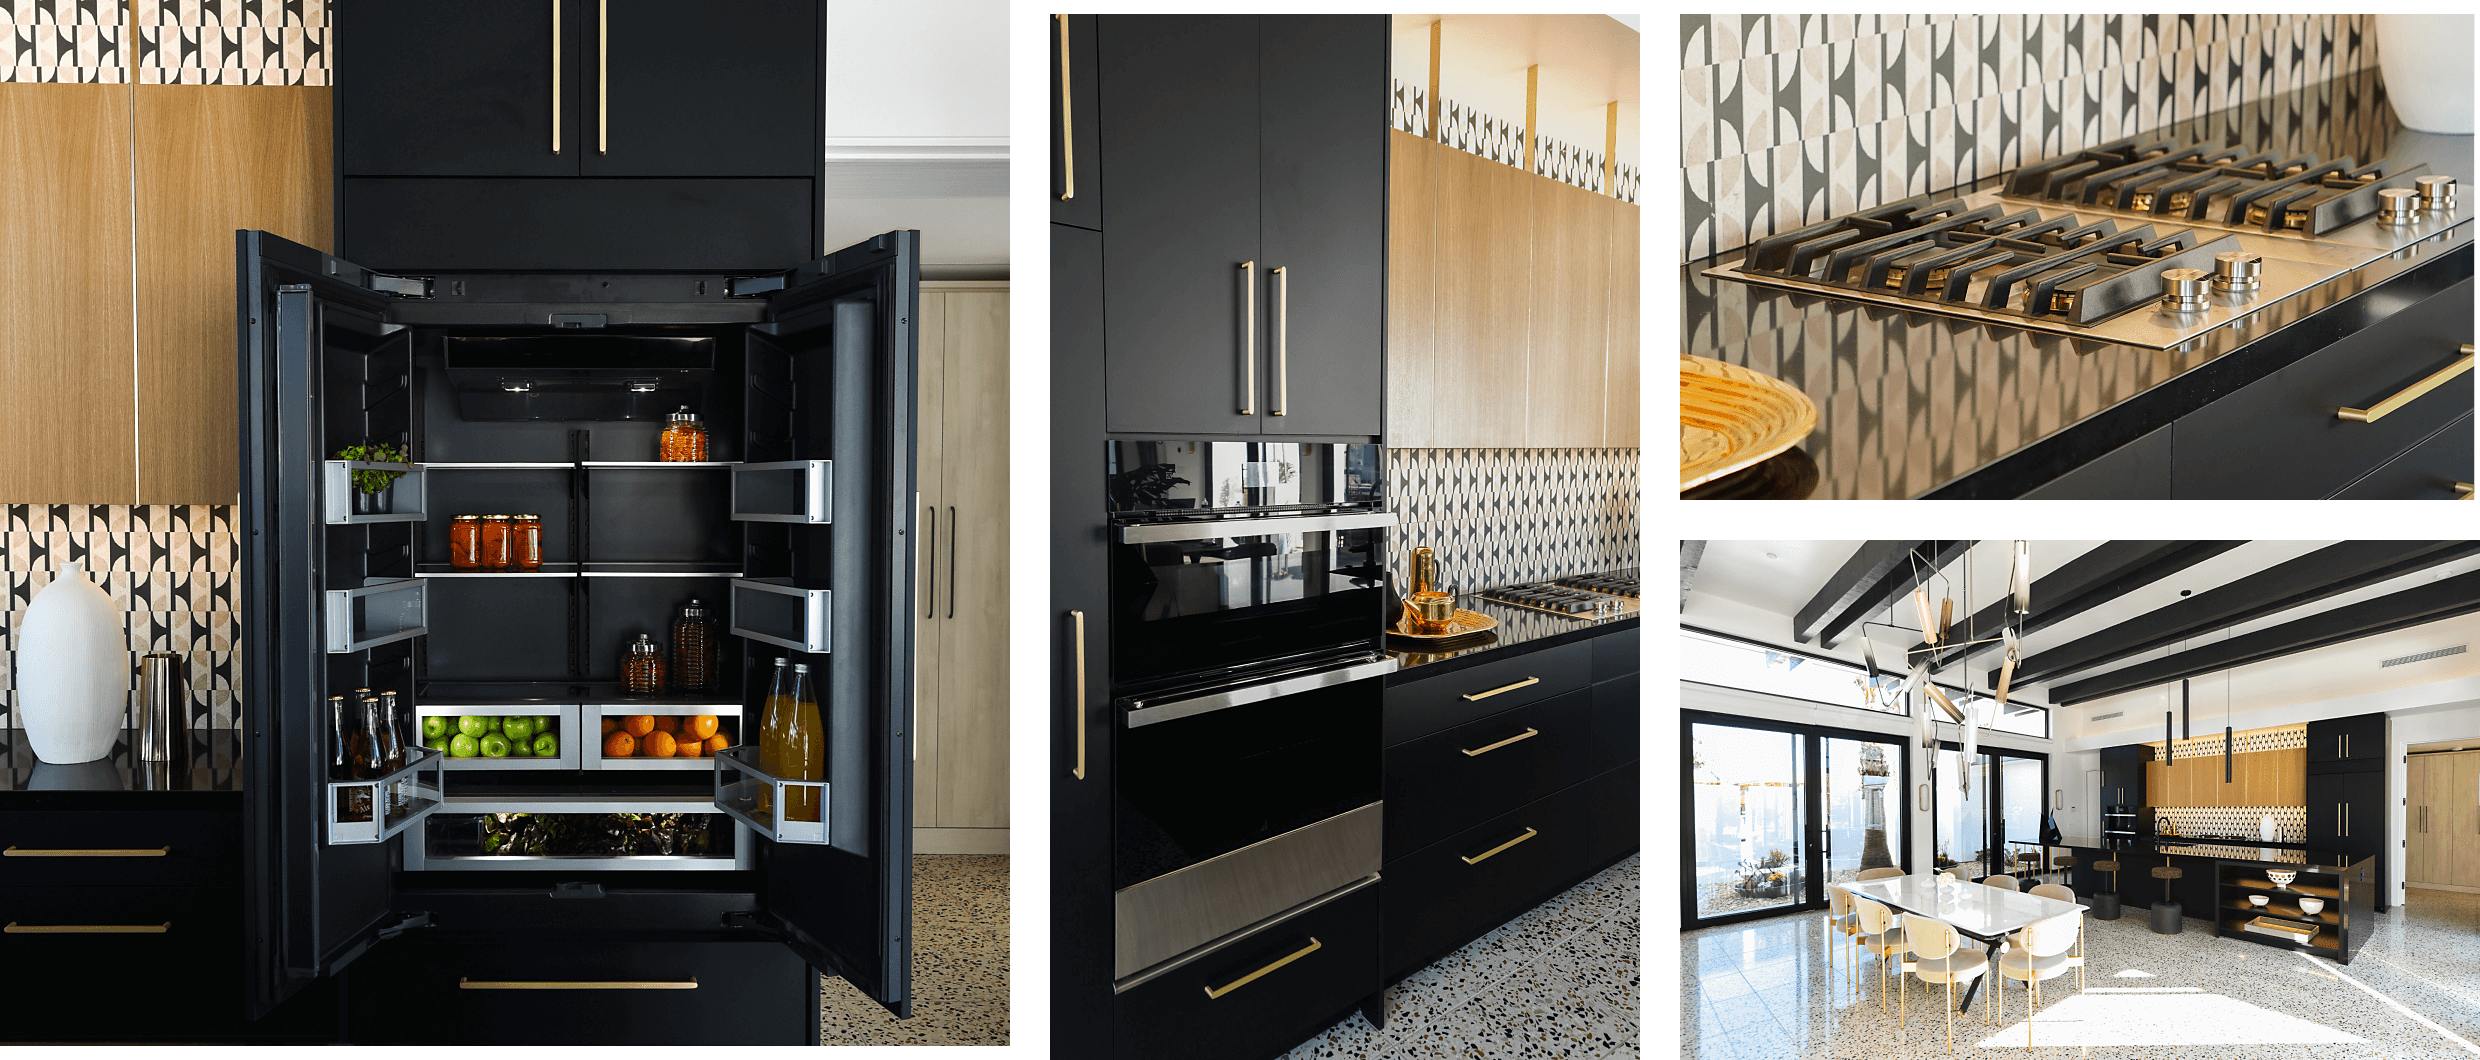 A collage of images including an open, stocked built-in bottom-freezer refrigerator in a modern kitchen with black cabinets; a JennAir® NOIR™ Microwave Combination Wall Oven in a modern kitchen with black cabinets; a gas cooktop in a modern kitchen with black cabinets; expansive view of a modern kitchen with black and white accents.